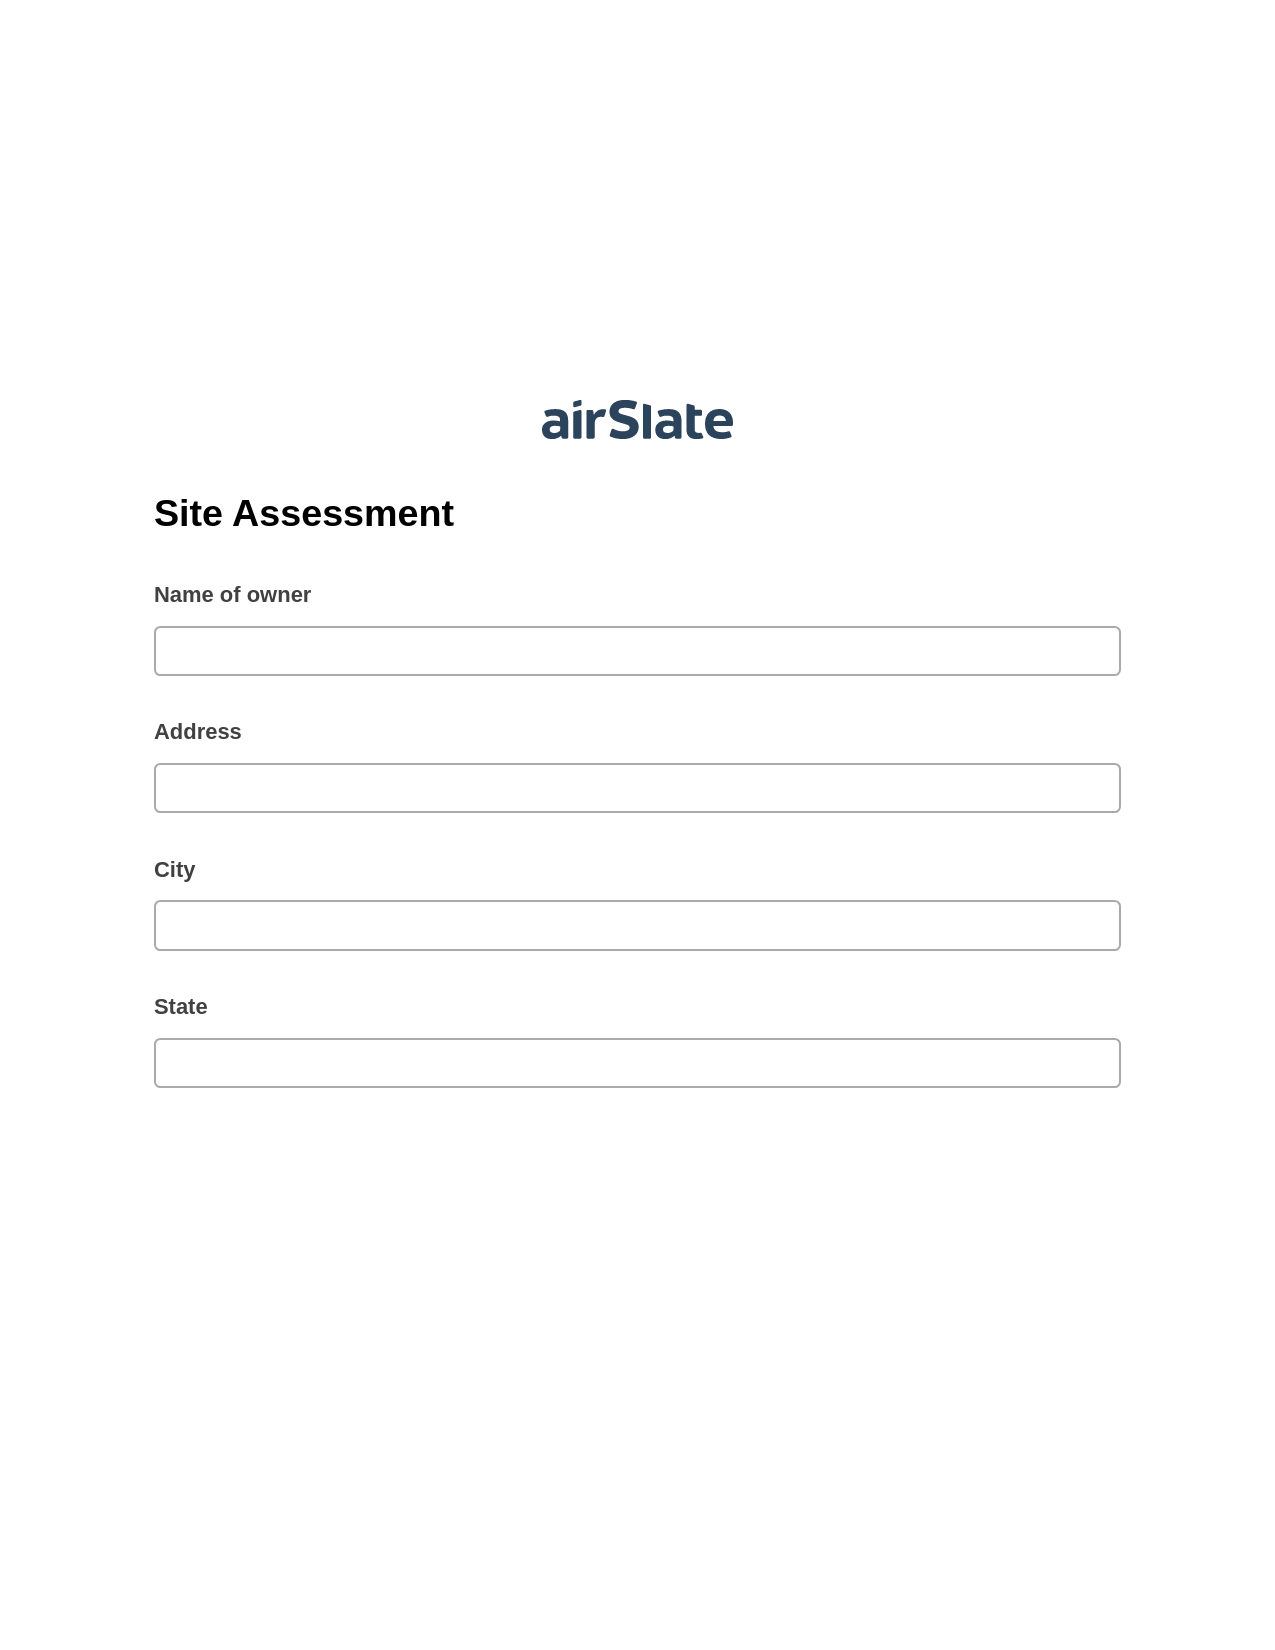 Site Assessment Pre-fill from another Slate Bot, In-person Signing Bot, Archive to SharePoint Folder Bot